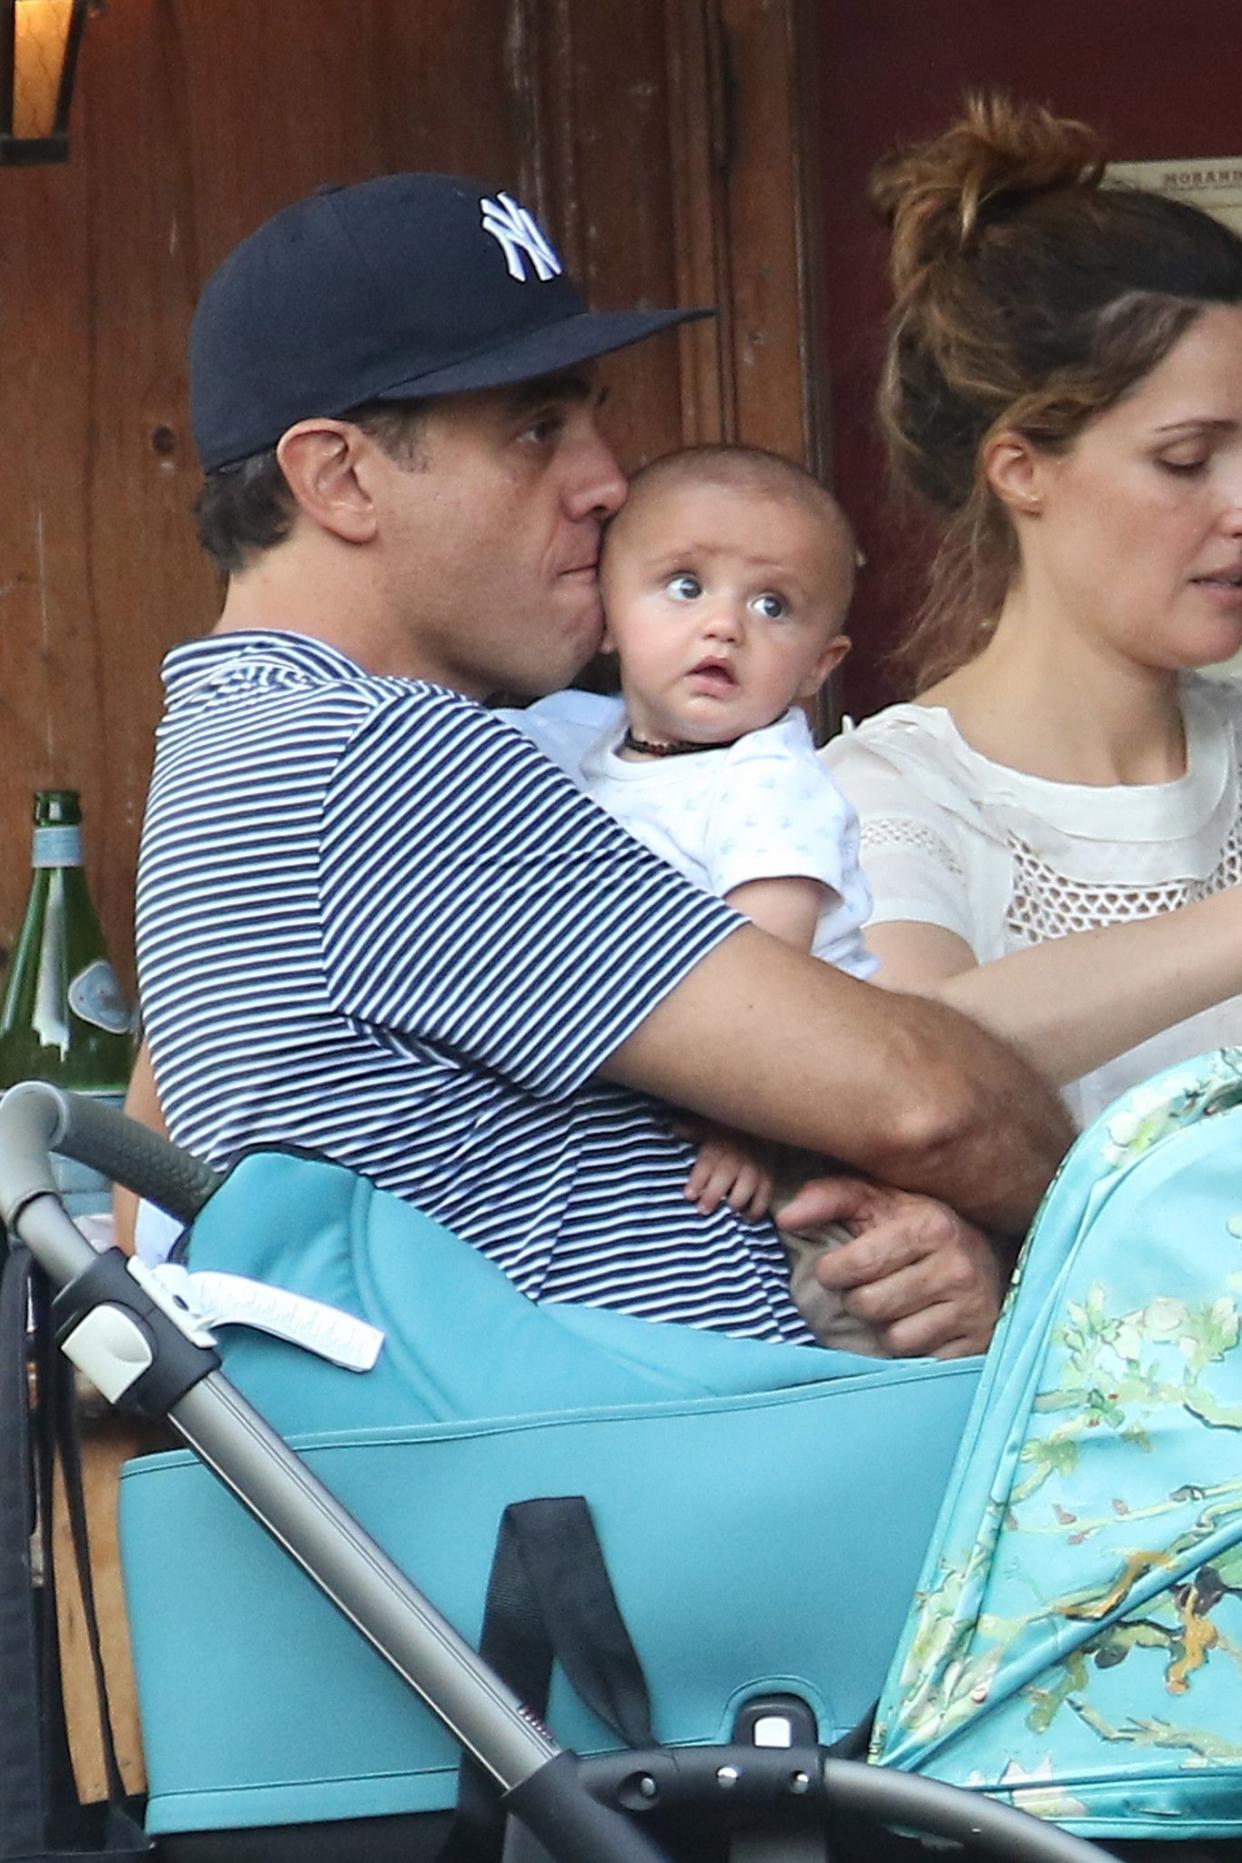 Bobby Cannavale nuzzled his adorable baby son as he enjoyed a meal with his wife Rose Byrne and family on May 31, 2016.